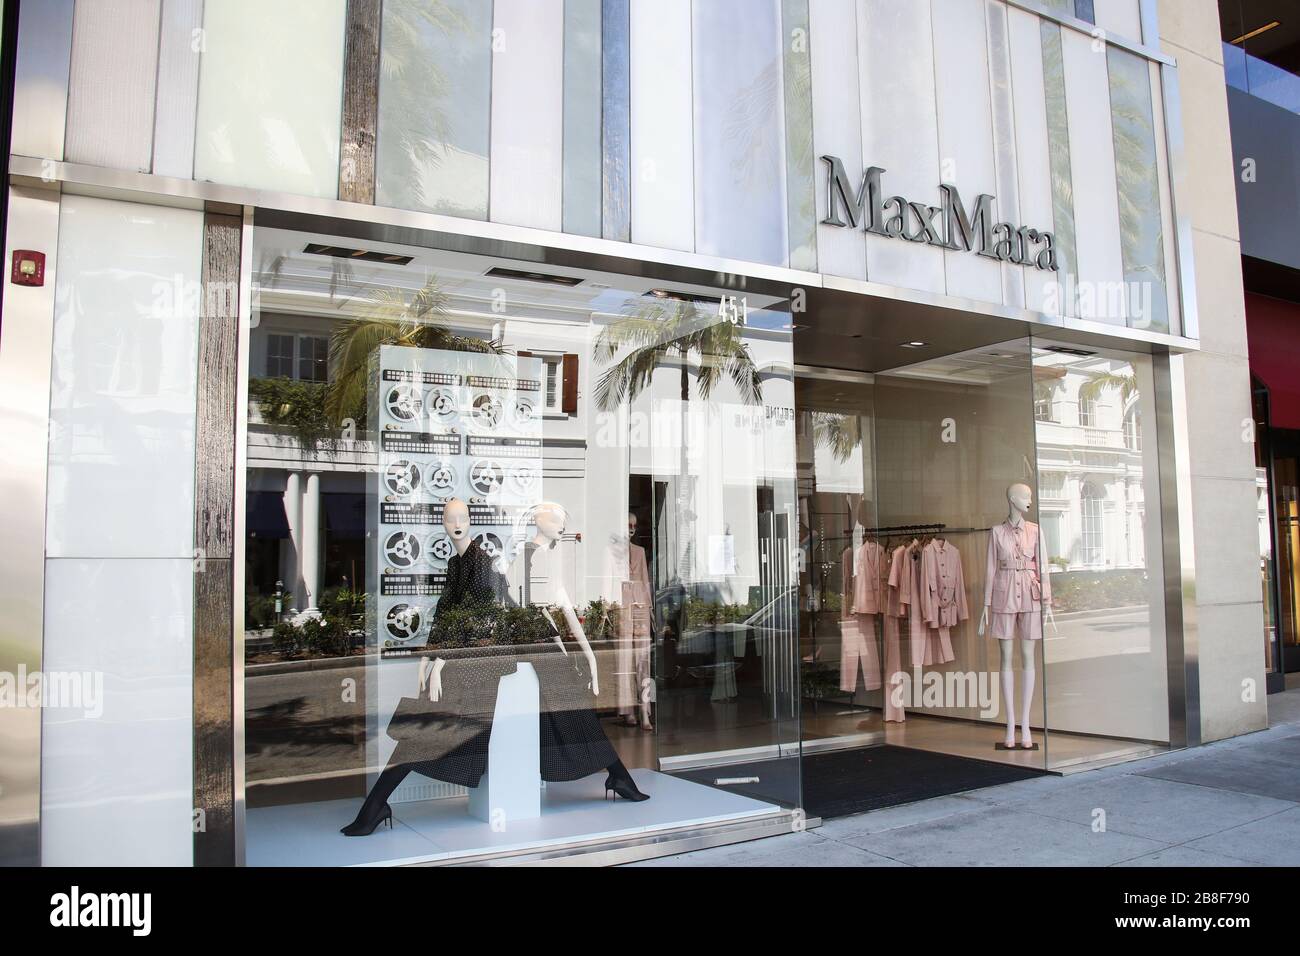 BEVERLY HILLS, LOS ANGELES, CALIFORNIA, USA - MARCH 21: MaxMara Beverly Hills Rodeo Drive store, temporarily closed due to the coronavirus, two days after the 'Safer at Home' order issued by both Los Angeles Mayor Eric Garcetti at the county level and California Governor Gavin Newsom at the state level on Thursday, March 19, 2020 which will stay in effect until at least April 19, 2020 amid the Coronavirus COVID-19 pandemic, March 21, 2020 in Beverly Hills, Los Angeles, California, United States. (Photo by Xavier Collin/Image Press Agency) Stock Photo